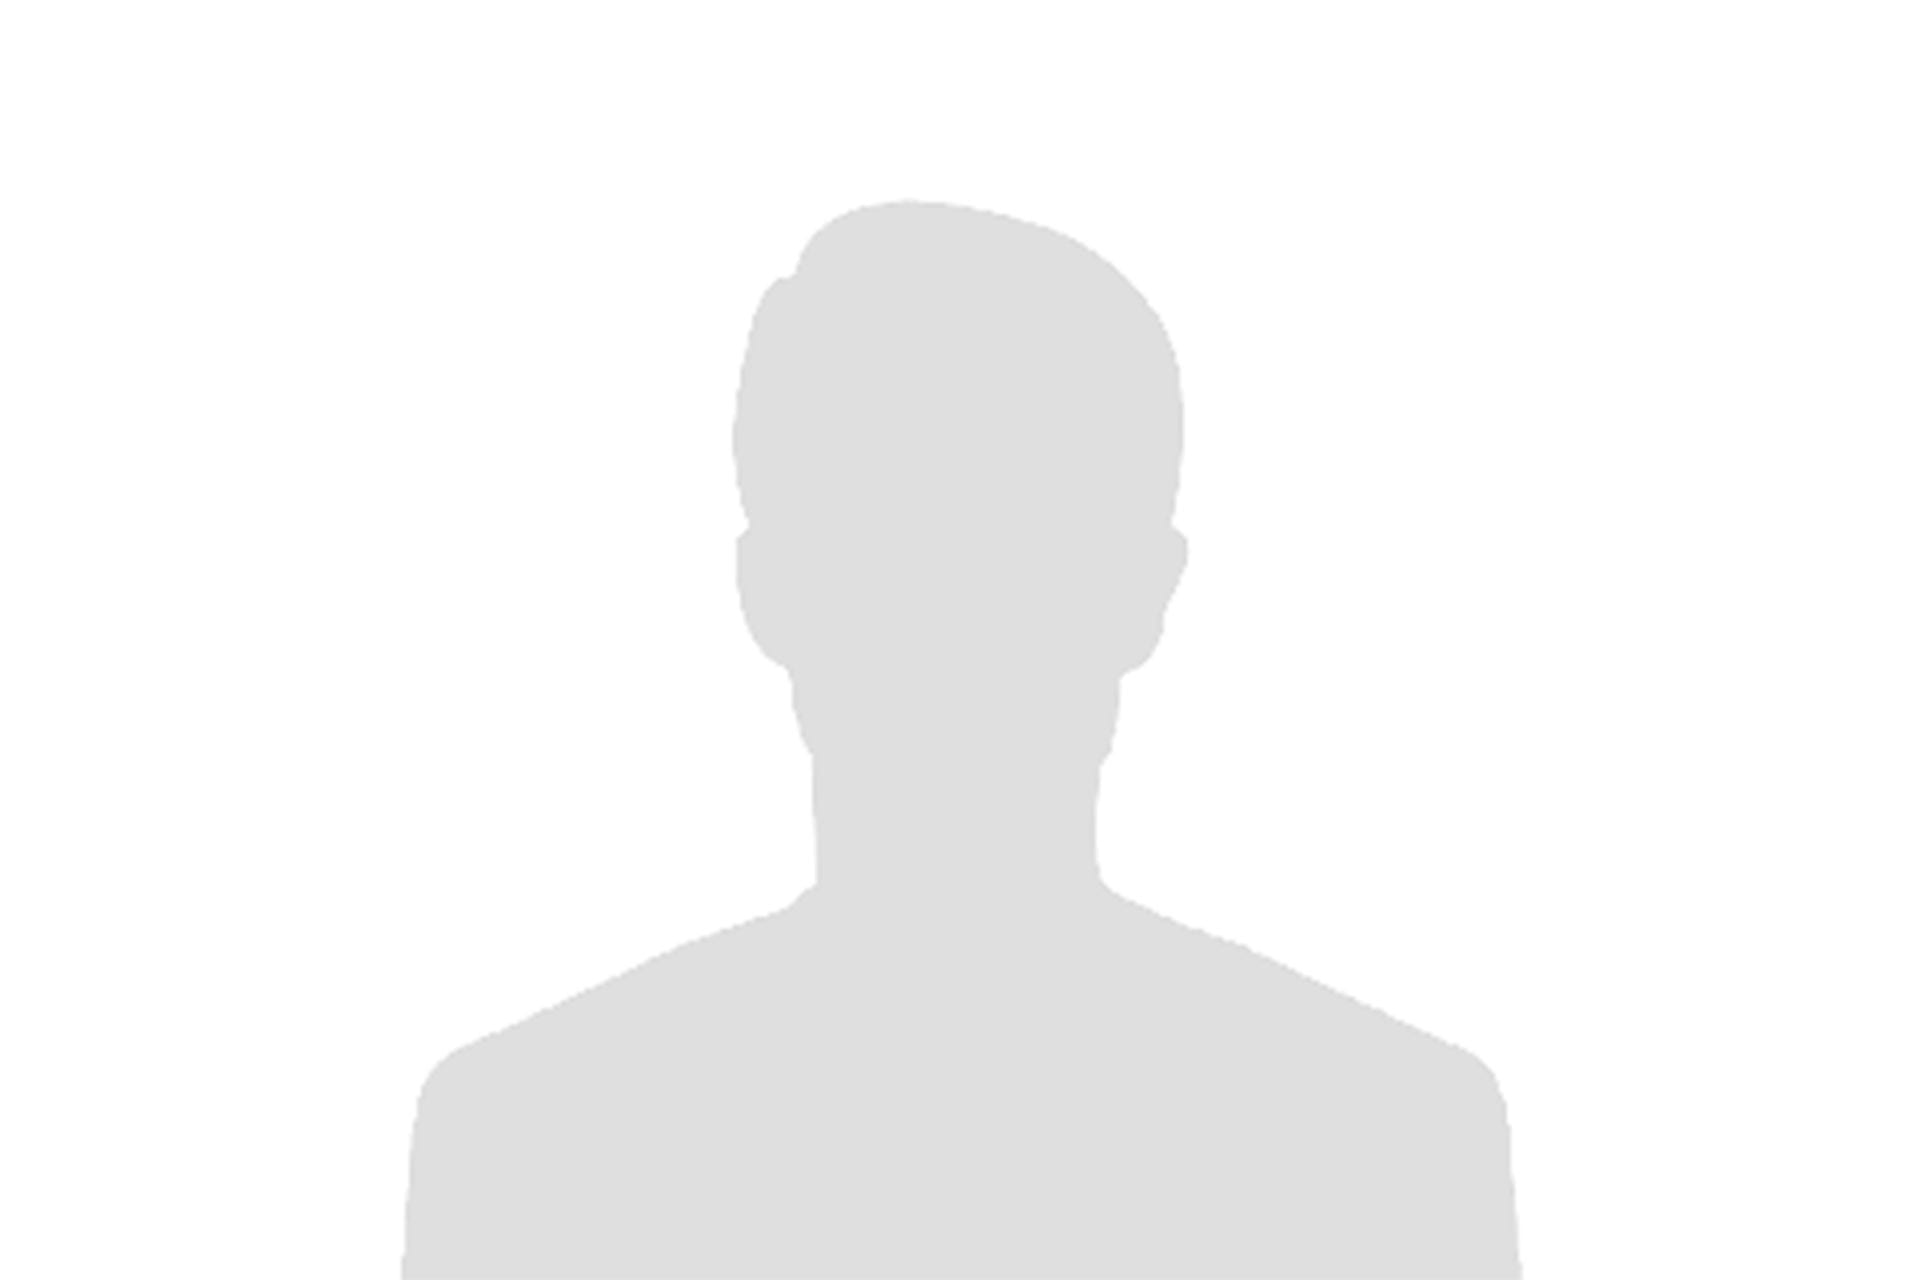 Placeholder Profile silhouette